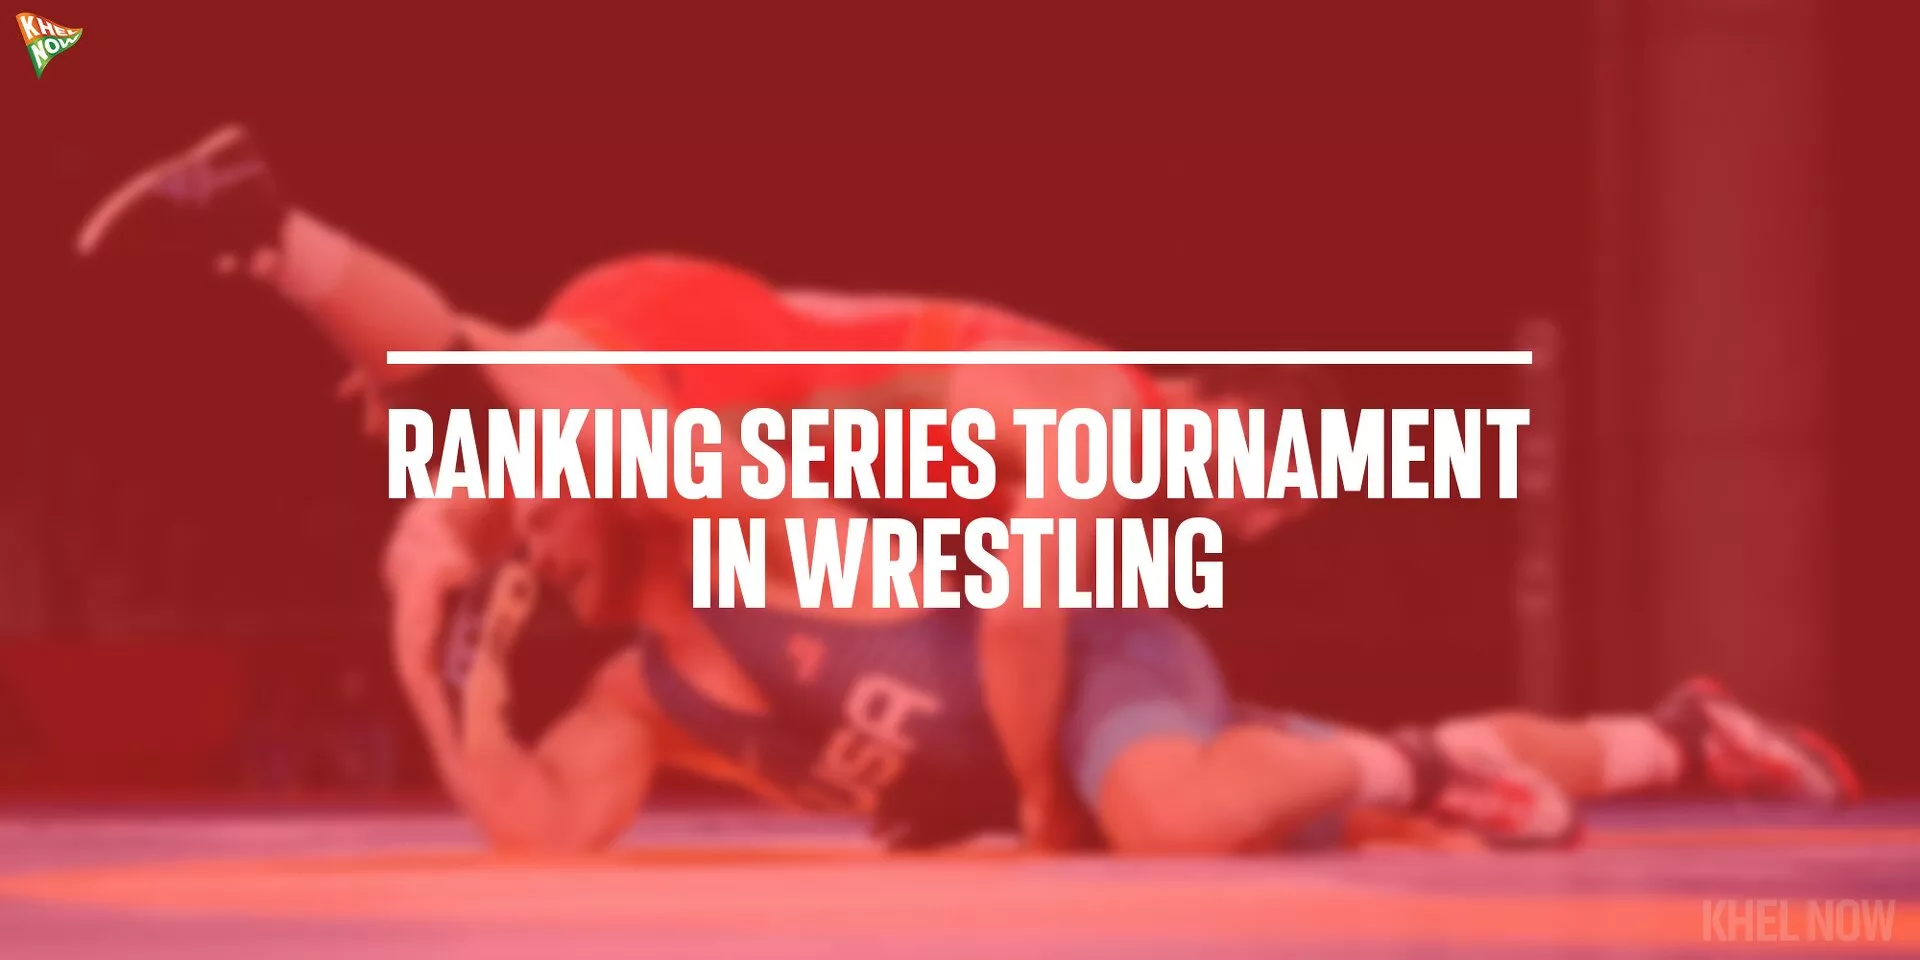 Explained What are Ranking Series tournaments in wrestling?